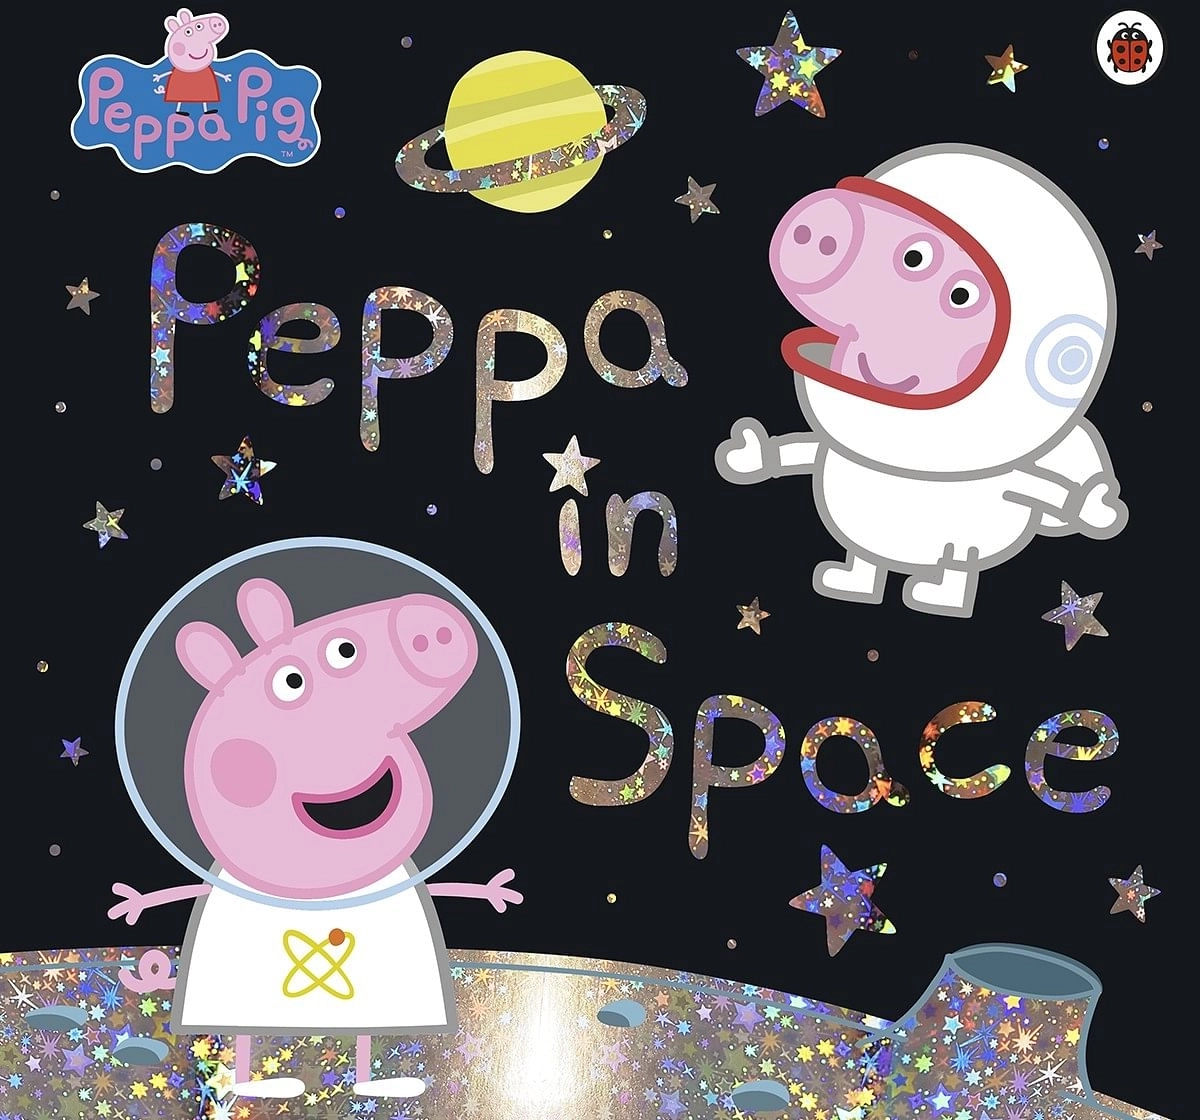 Peppa Pig: Peppa in Space, 32 Pages Book by Ladybird, Paperback